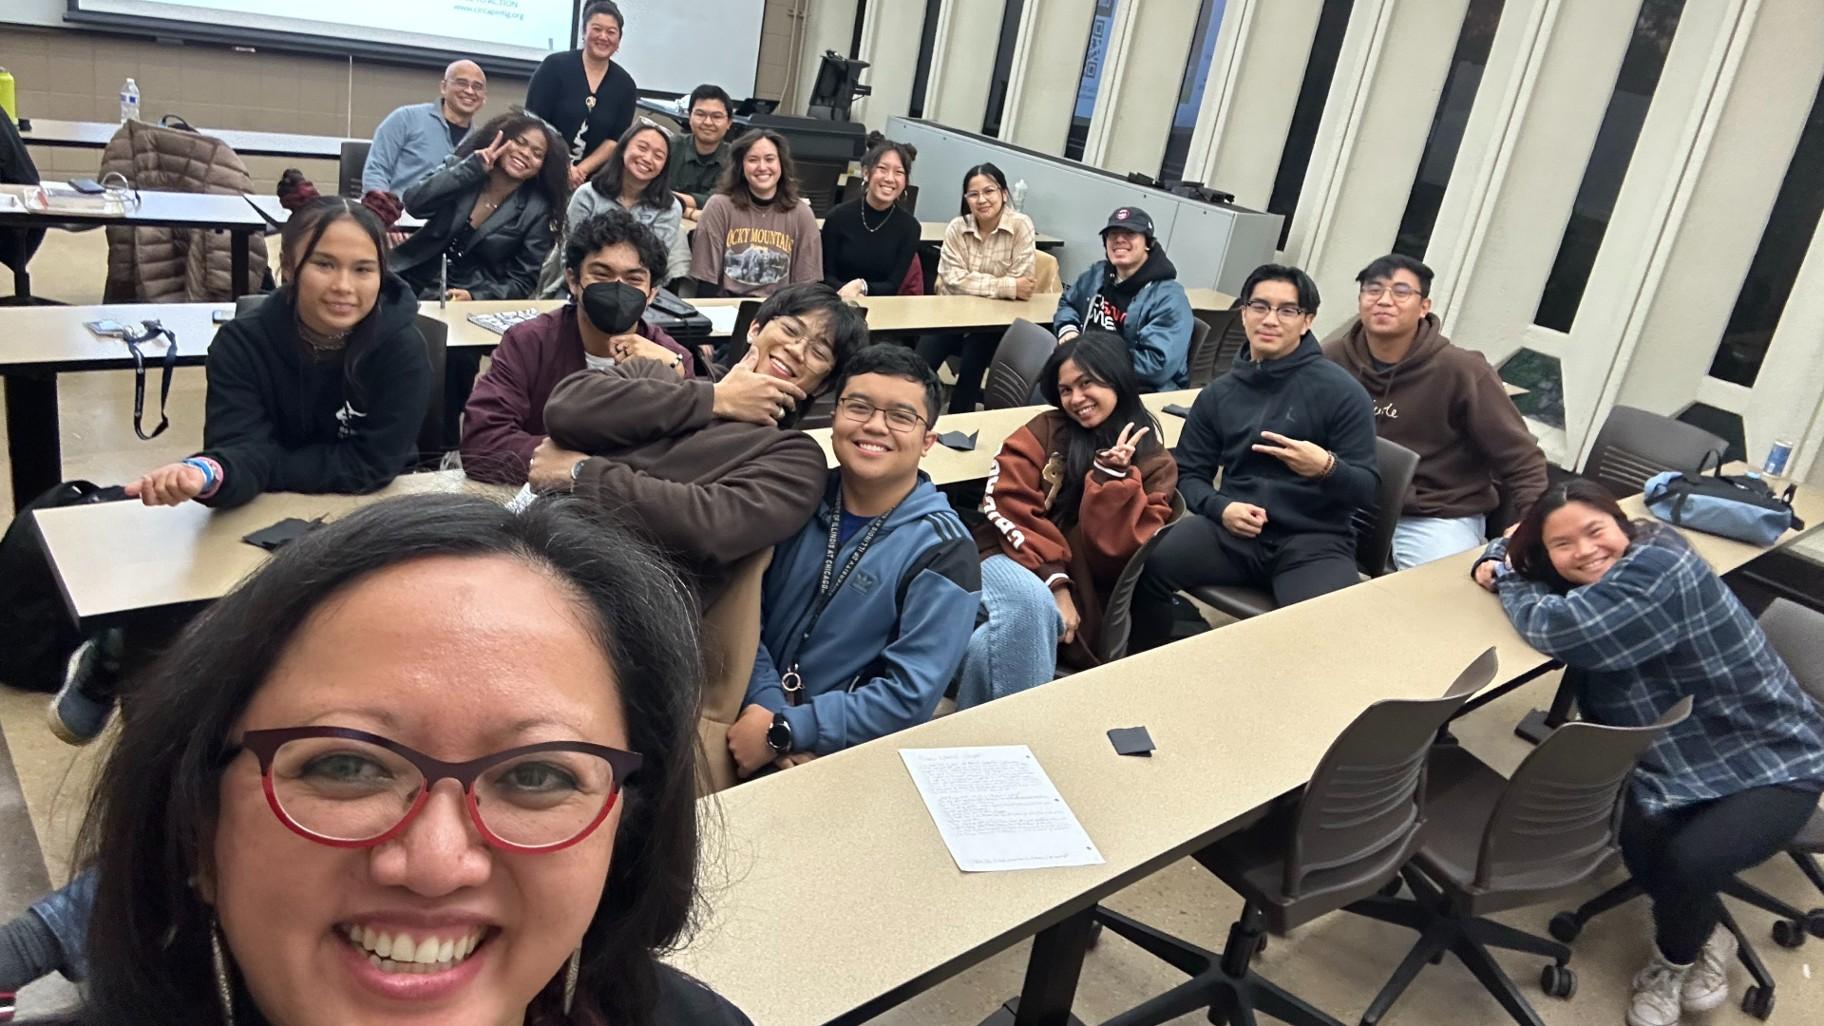 Students taking Intro to Filipino American Studies at UIC are visited by guests Ginger Leopoldo and Larry Leopoldo from the organization CIRCA-Pintig on Oct 10. (Courtesy of Anna Guevarra)